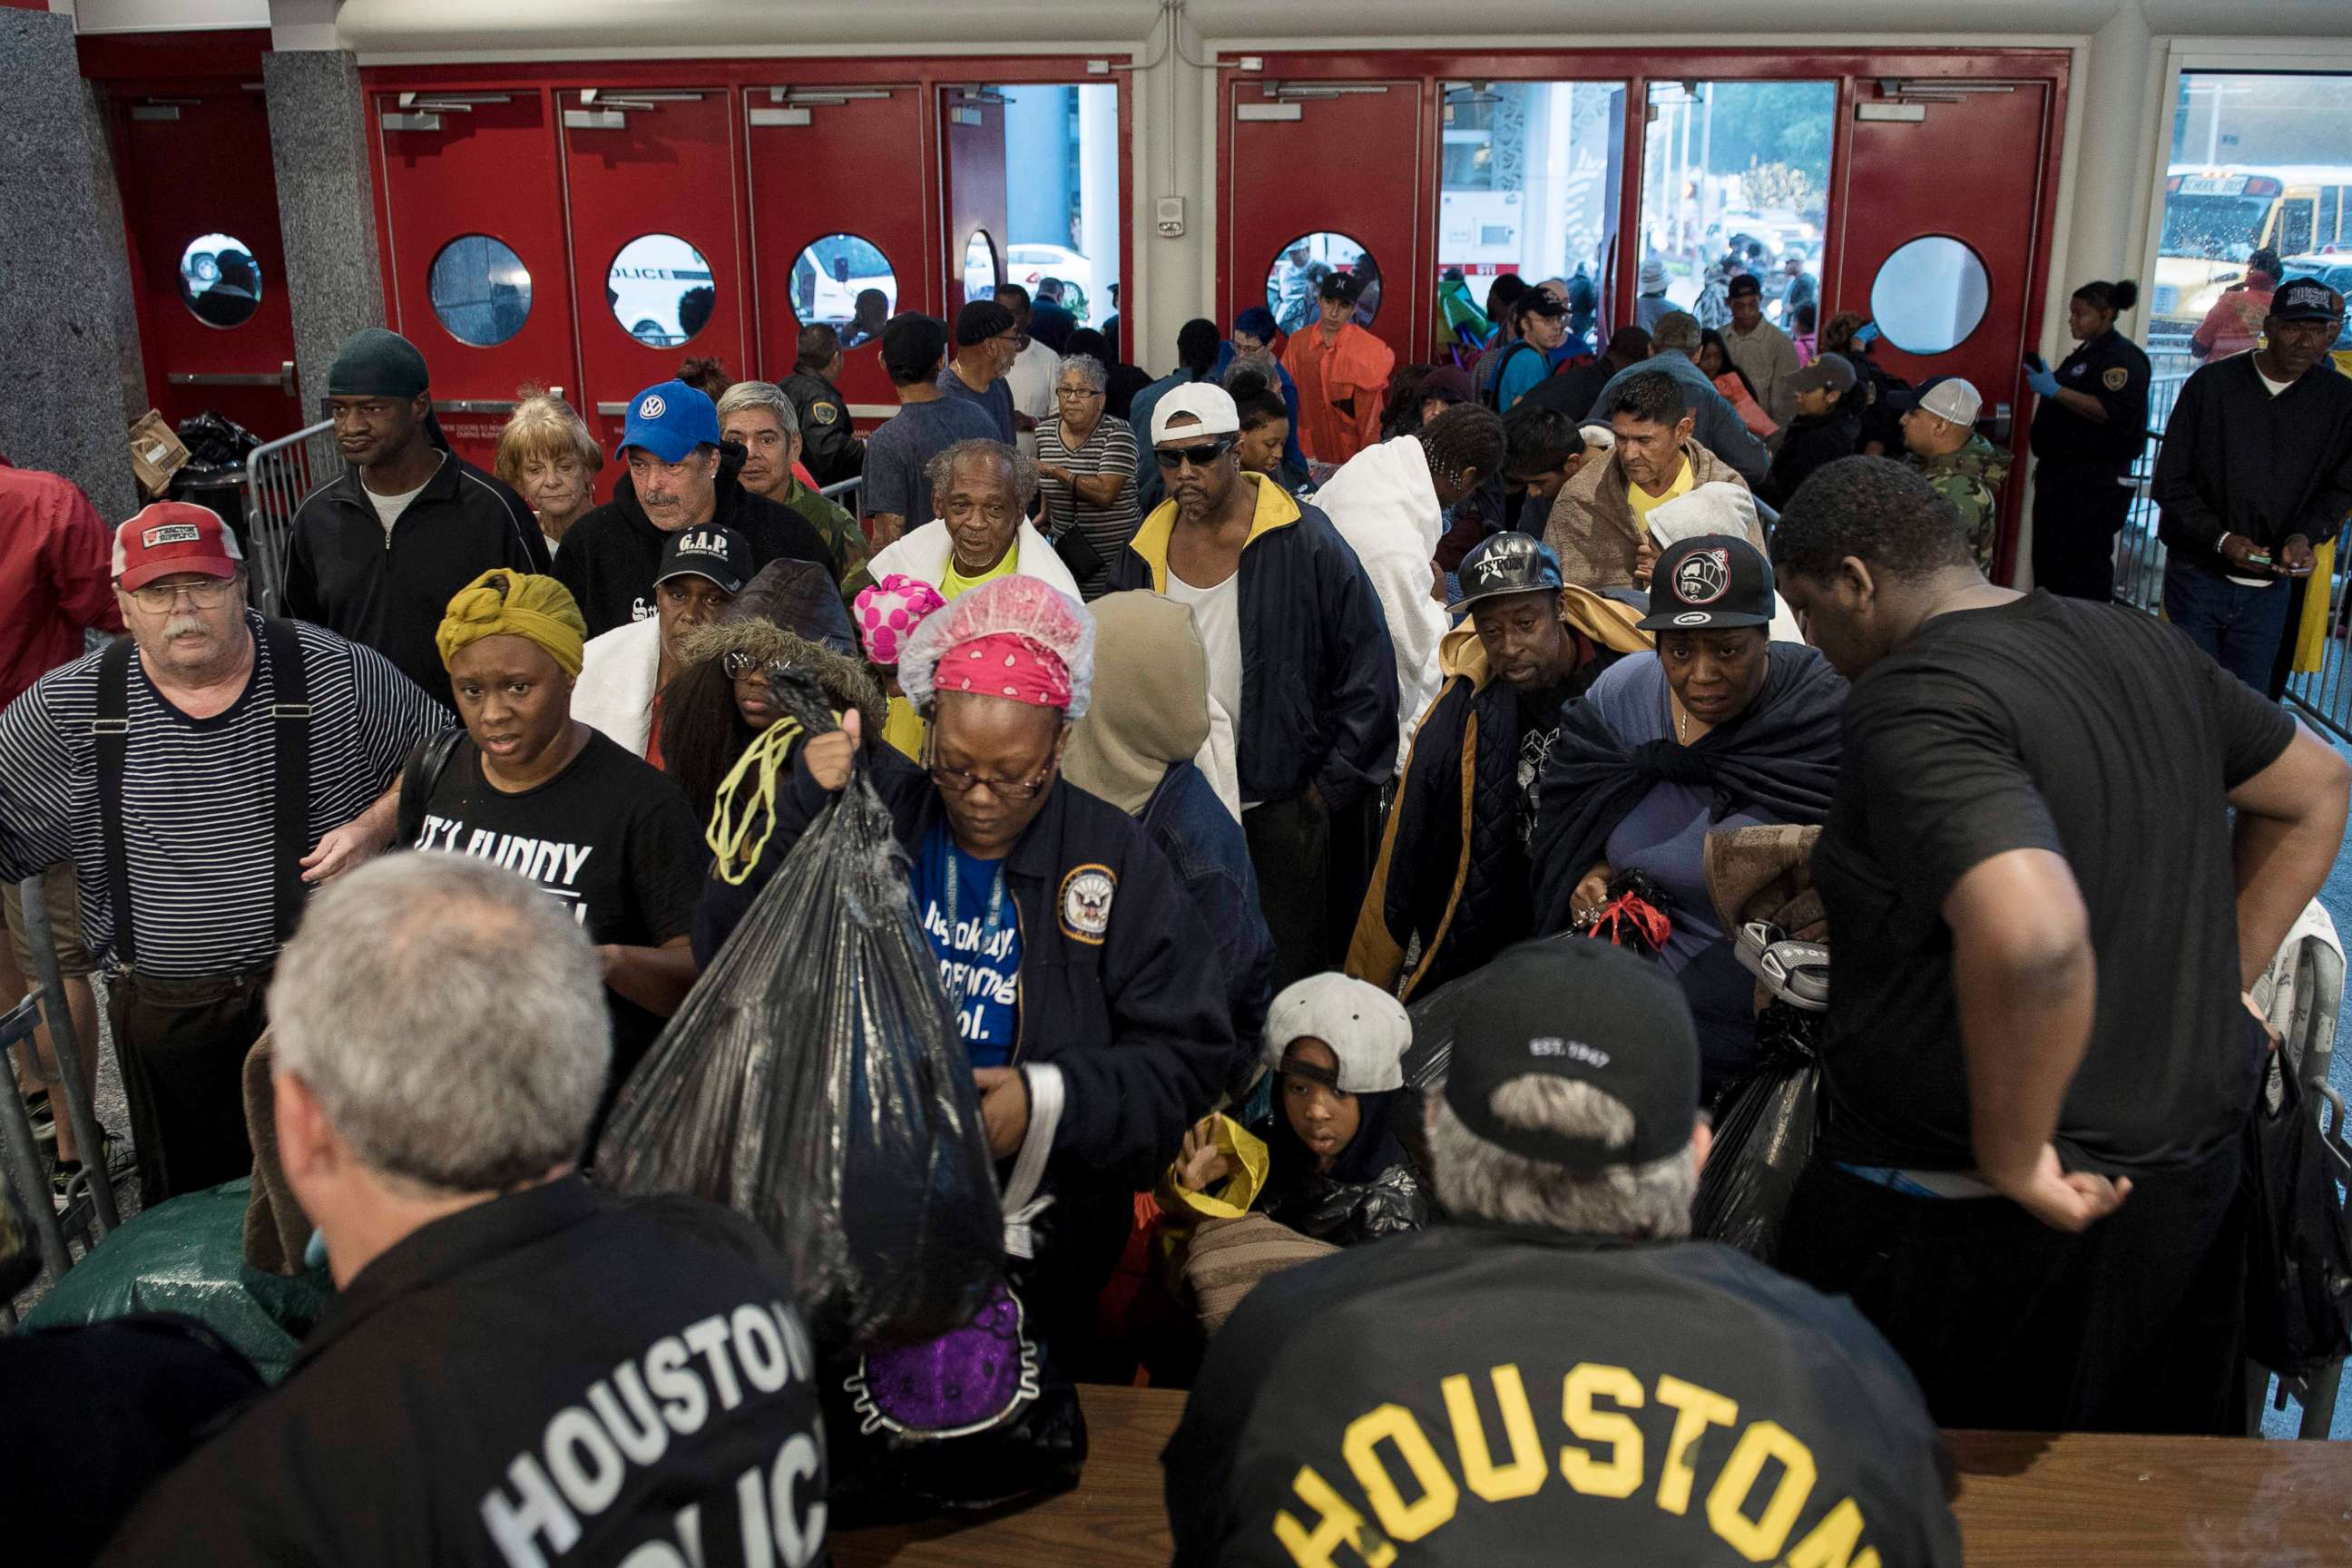 PHOTO: People wait to be checked by police before entering a shelter in the George R. Brown Convention Center during the aftermath of Hurricane Harvey, Aug. 28, 2017, in Houston.